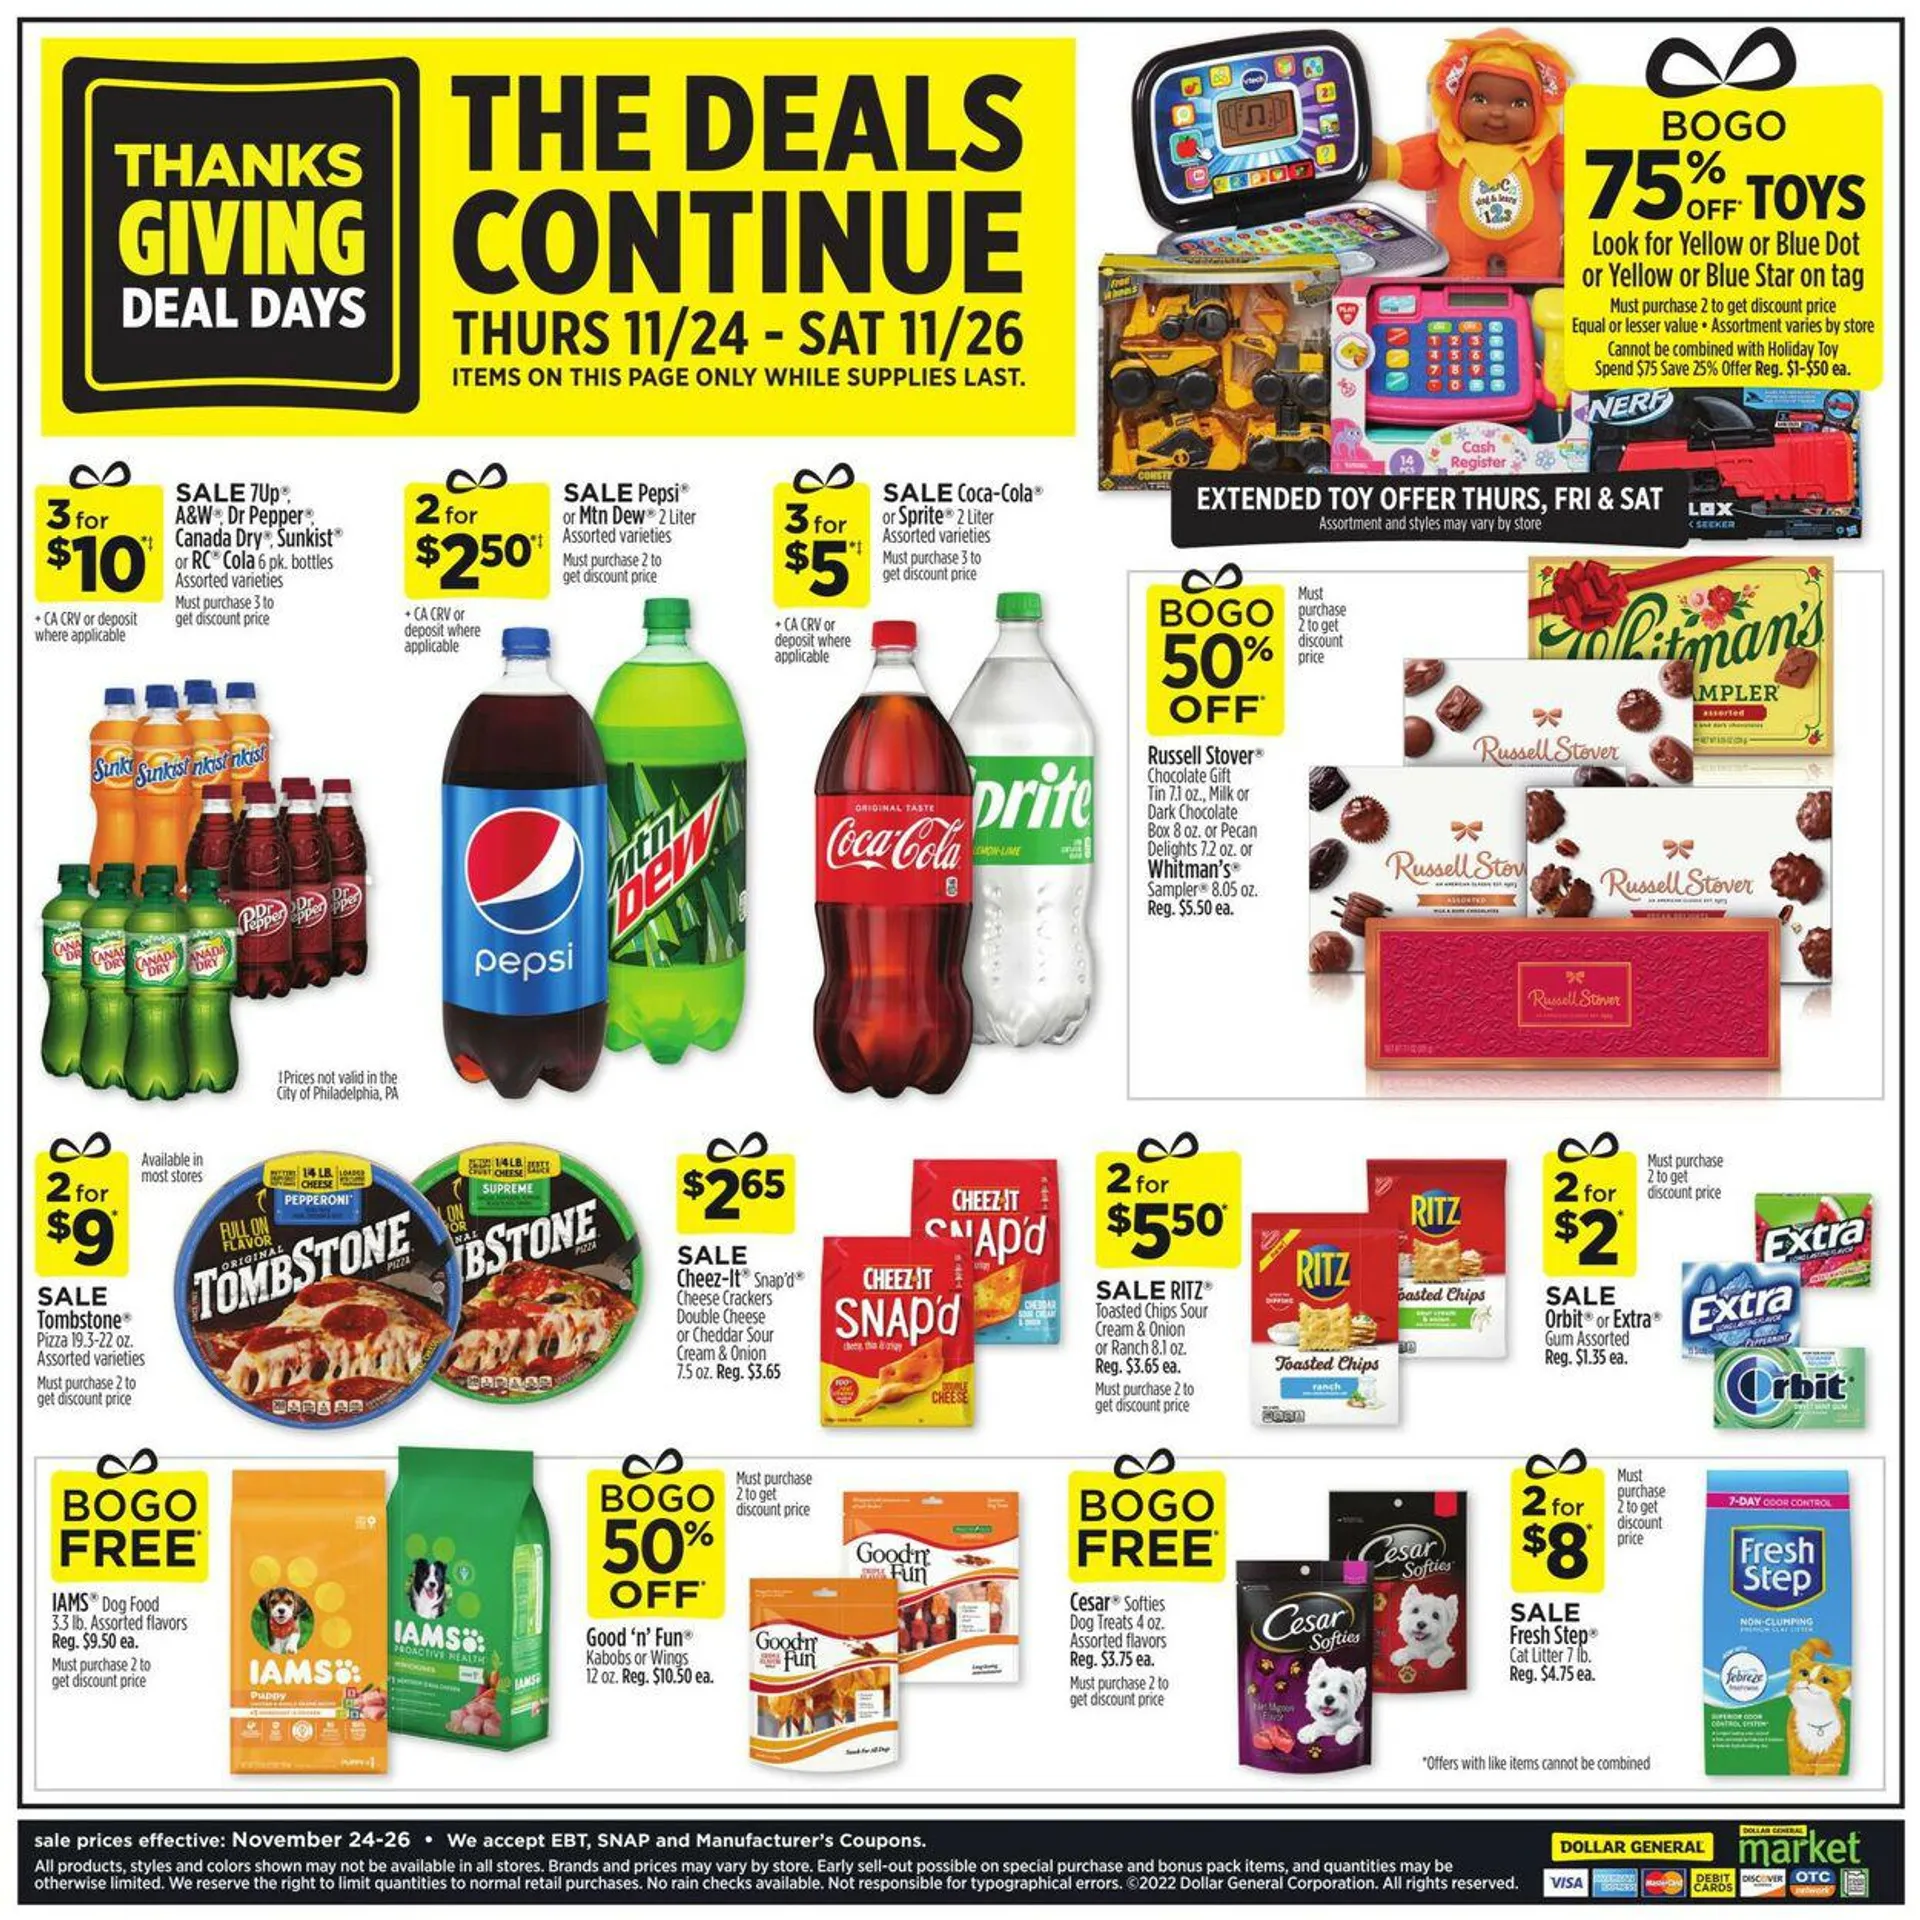 Dollar General Current weekly ad - 5